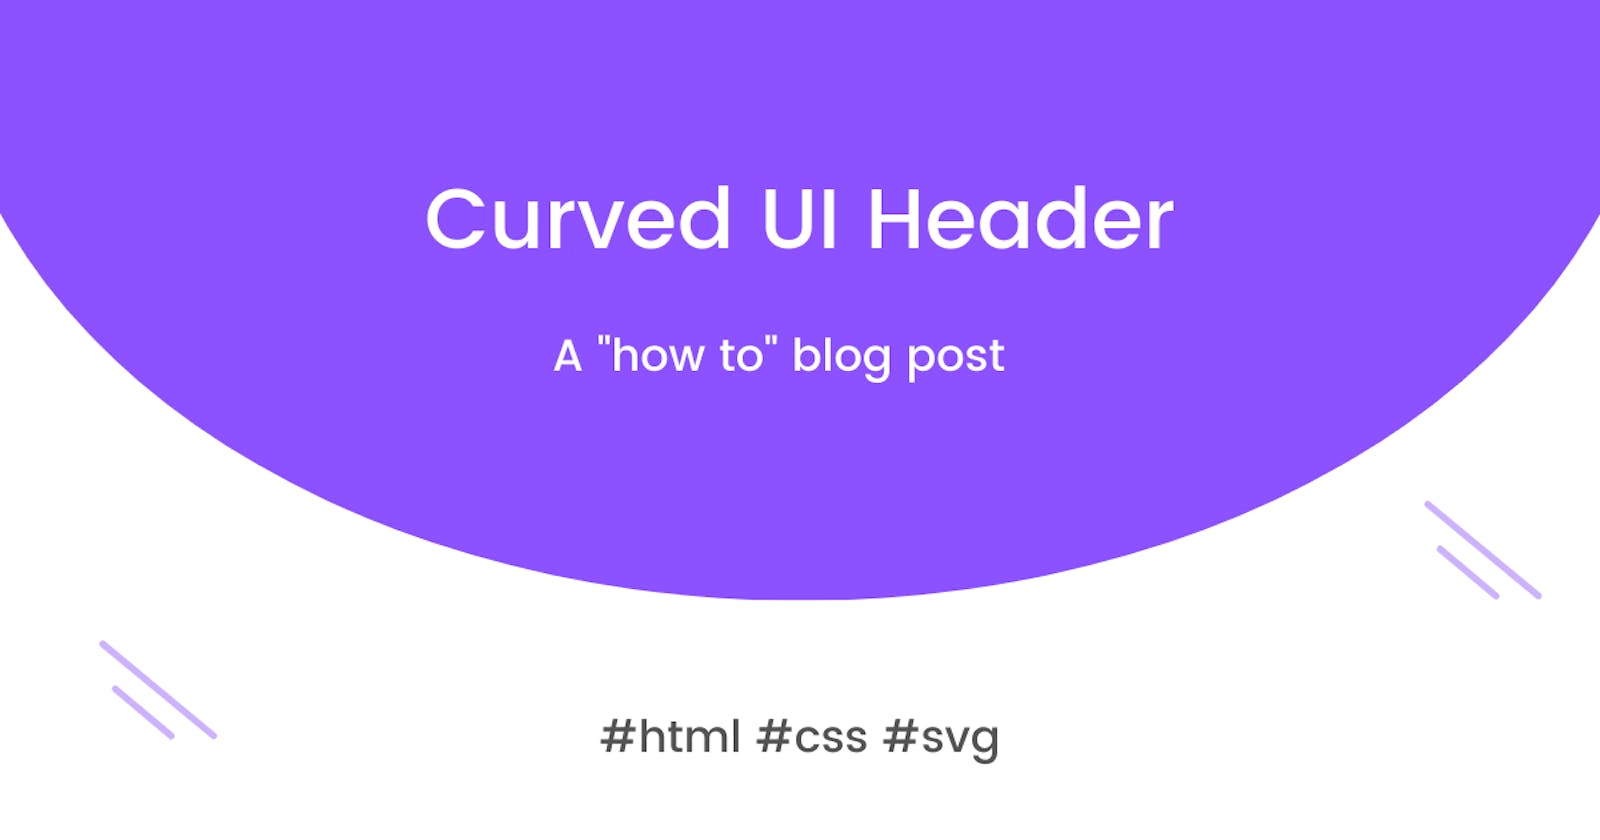 How to build - Curved UI Header